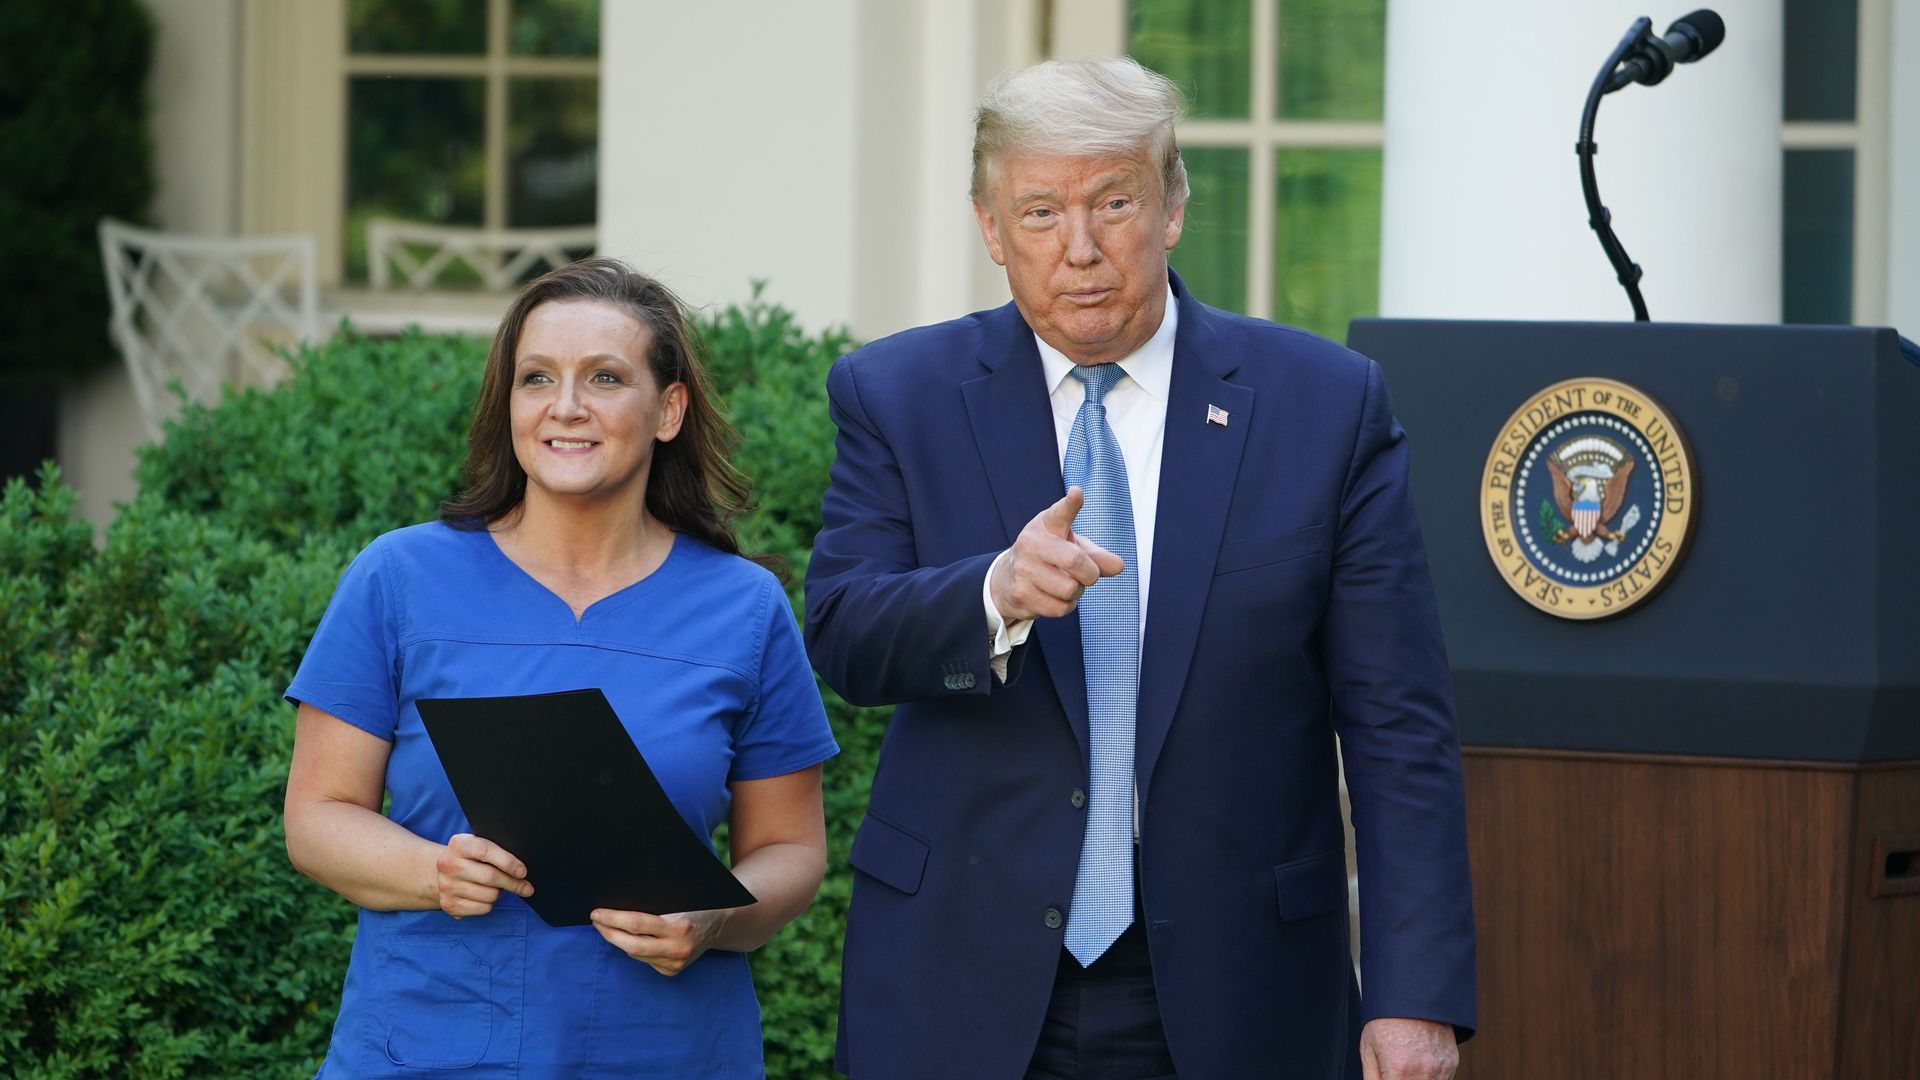 President Trump and nurse Amy Ford at the White House